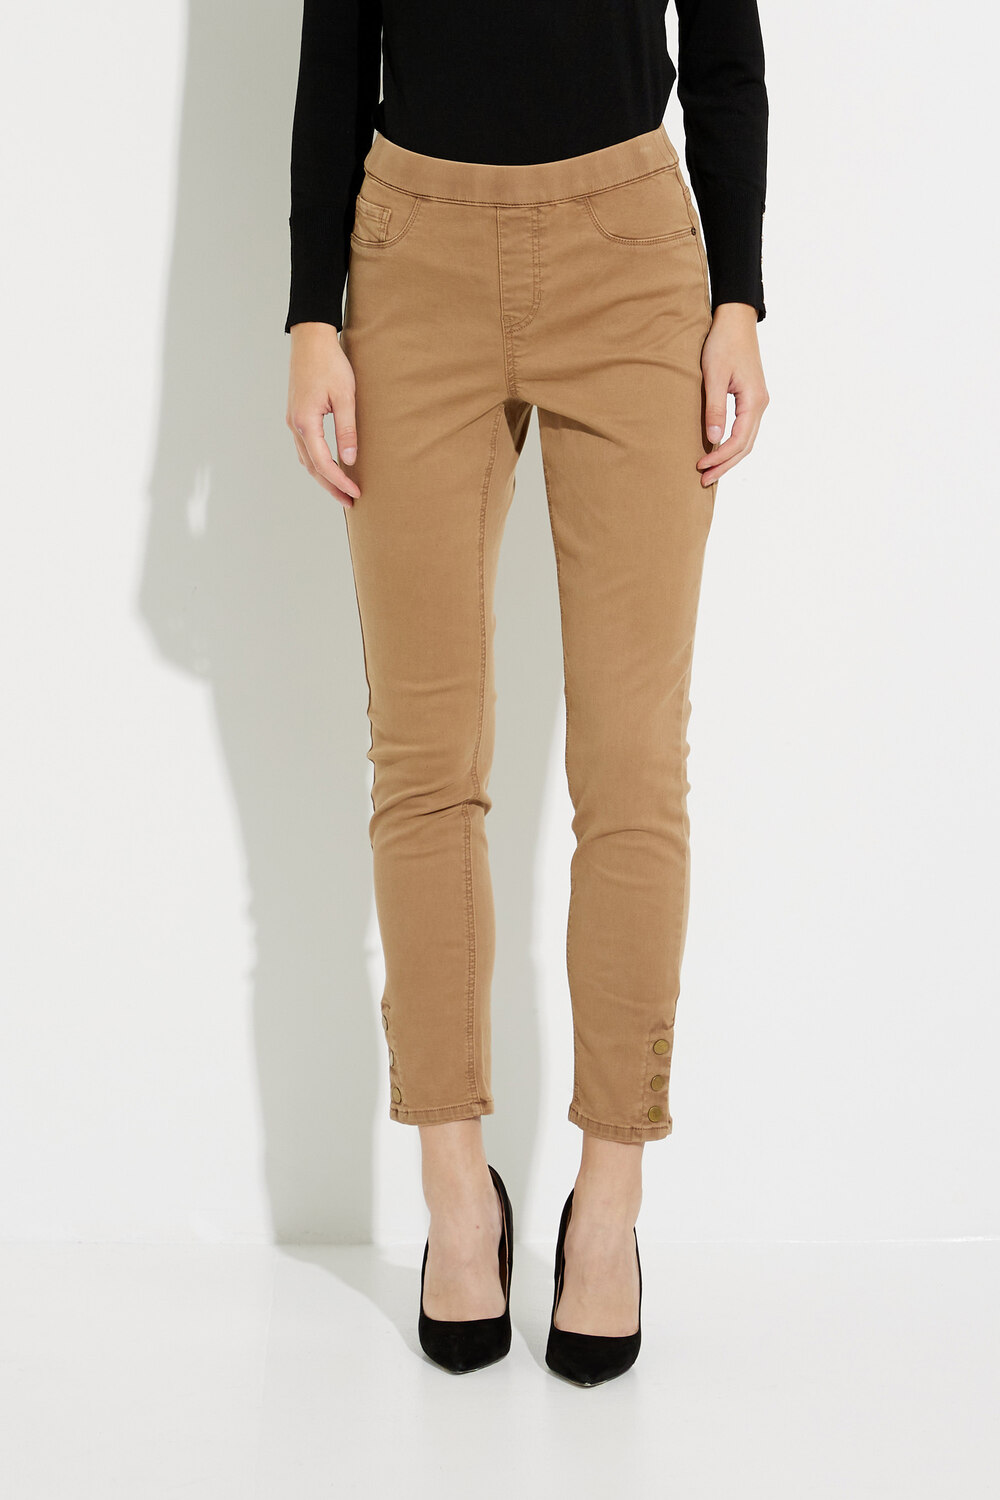 Twill Pants with Snap Button Hem Style C5302R. Chestnut